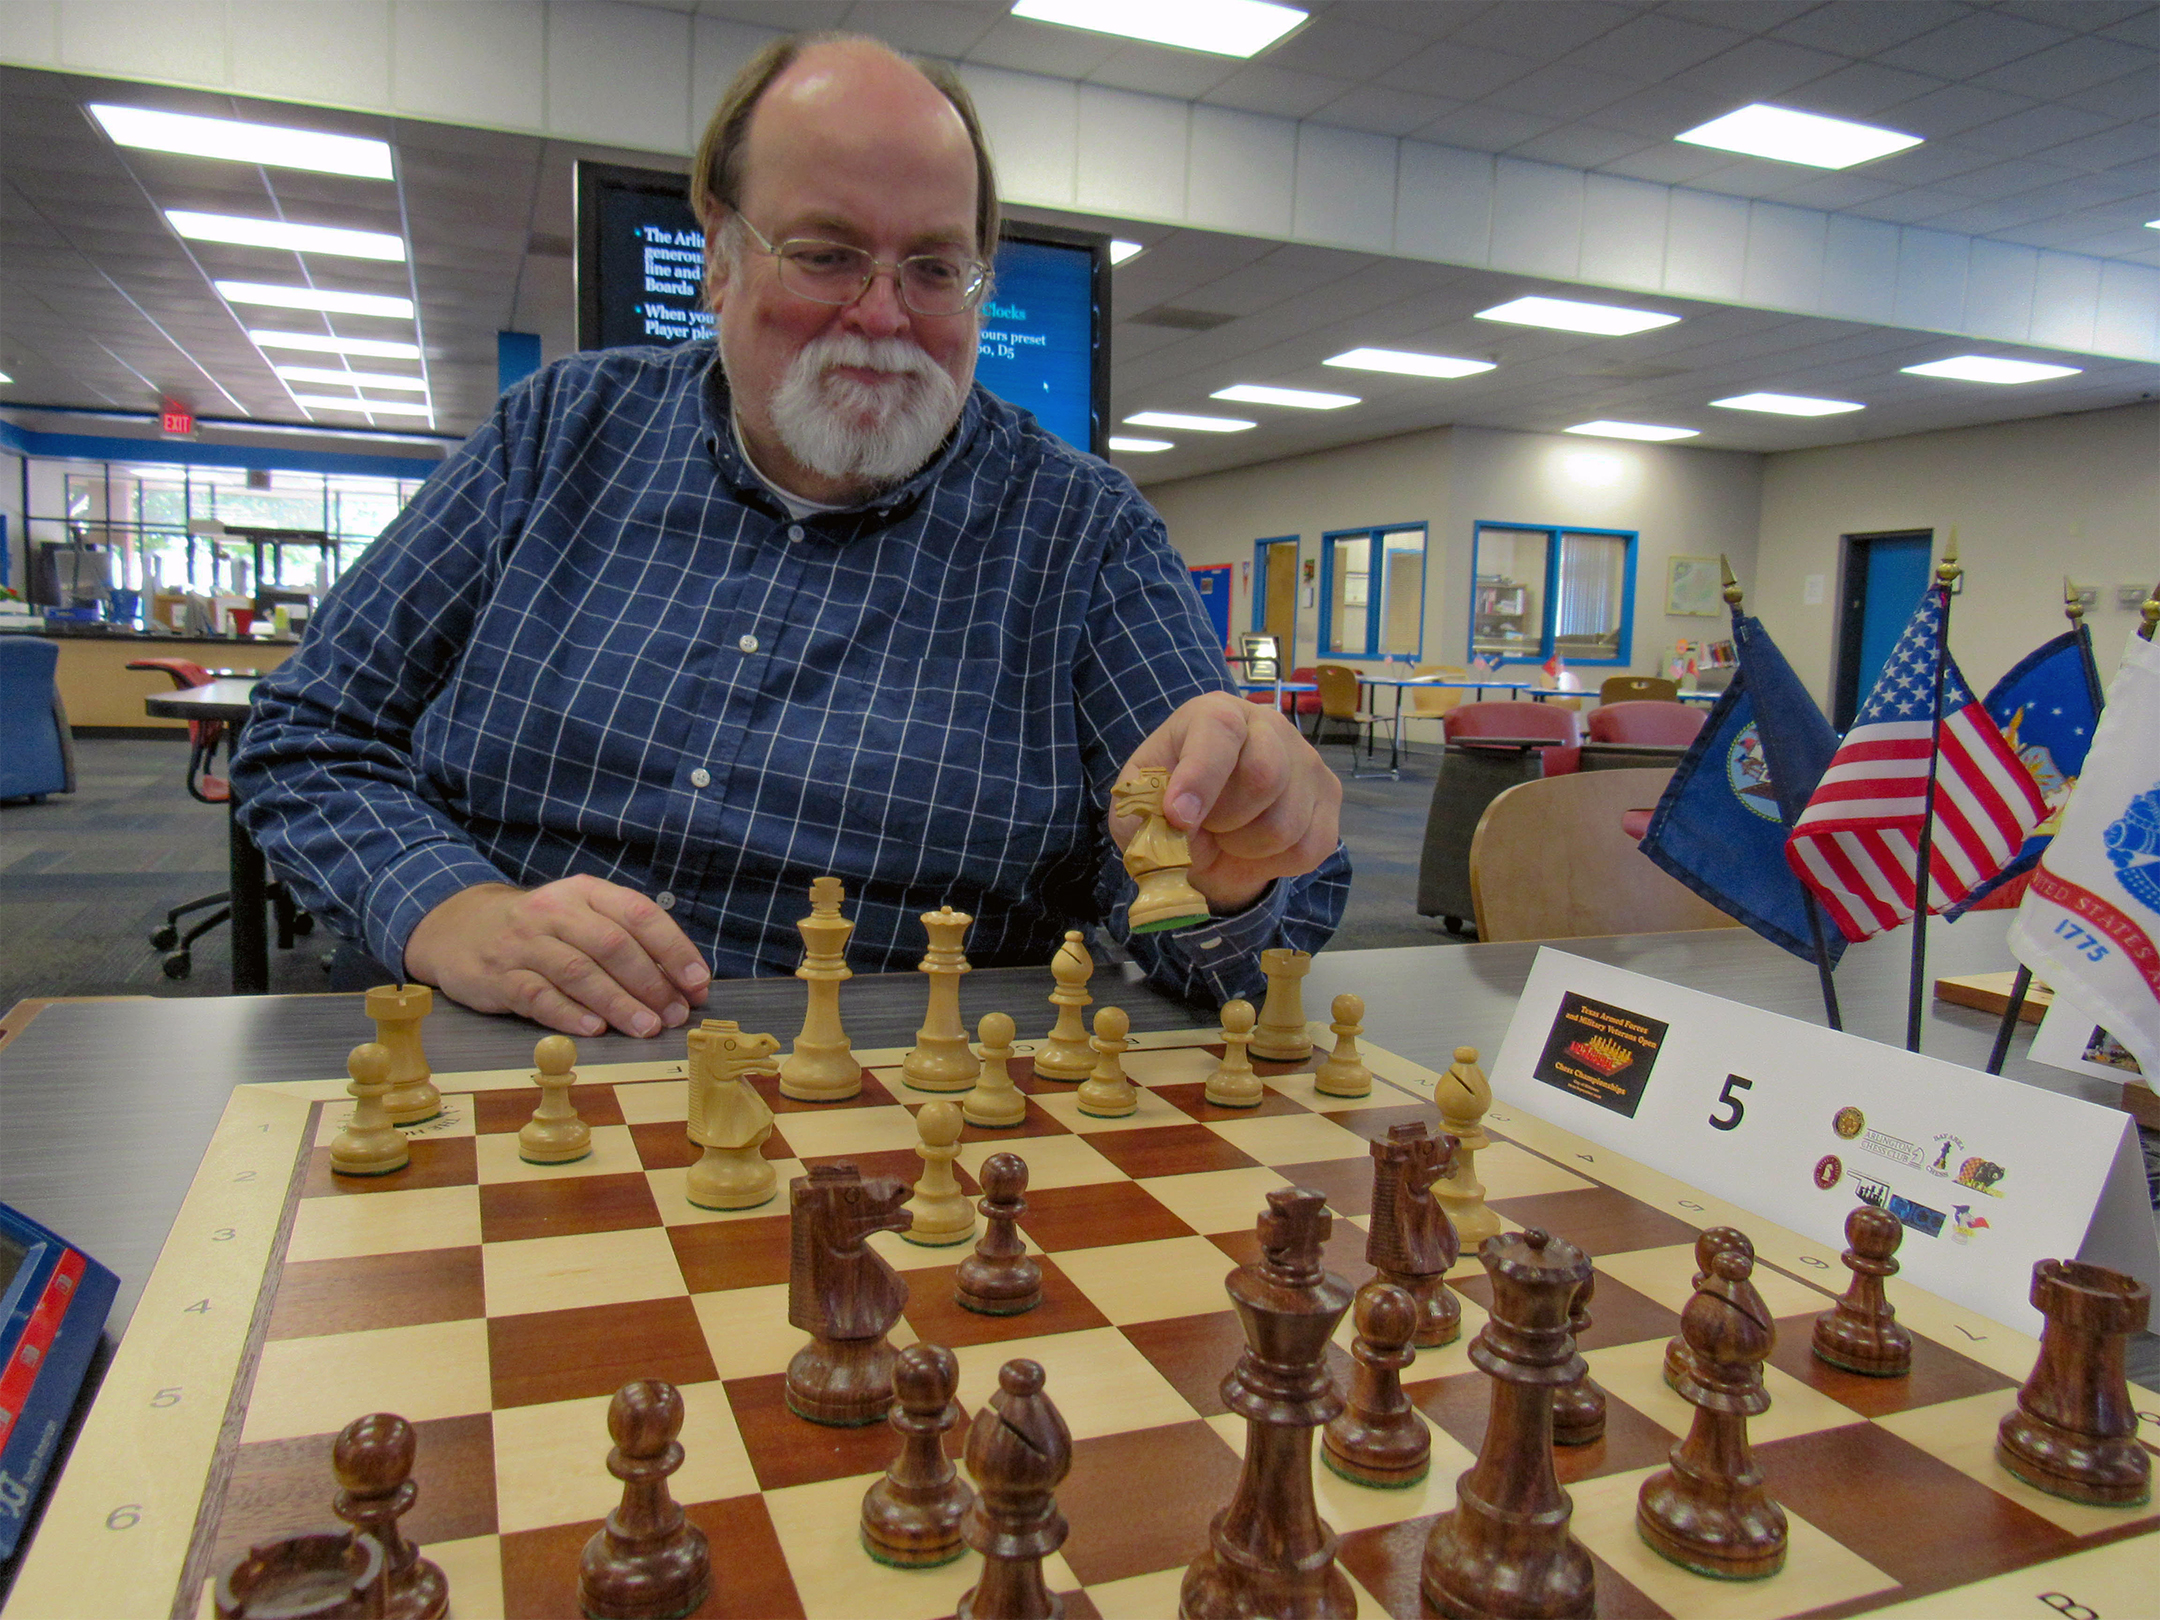 Joe Shaughnessy, Library Director, spent the last weekend of September 2018 hosting 18 chess-playing veterans.  Photo by Jim Hollingsworth.